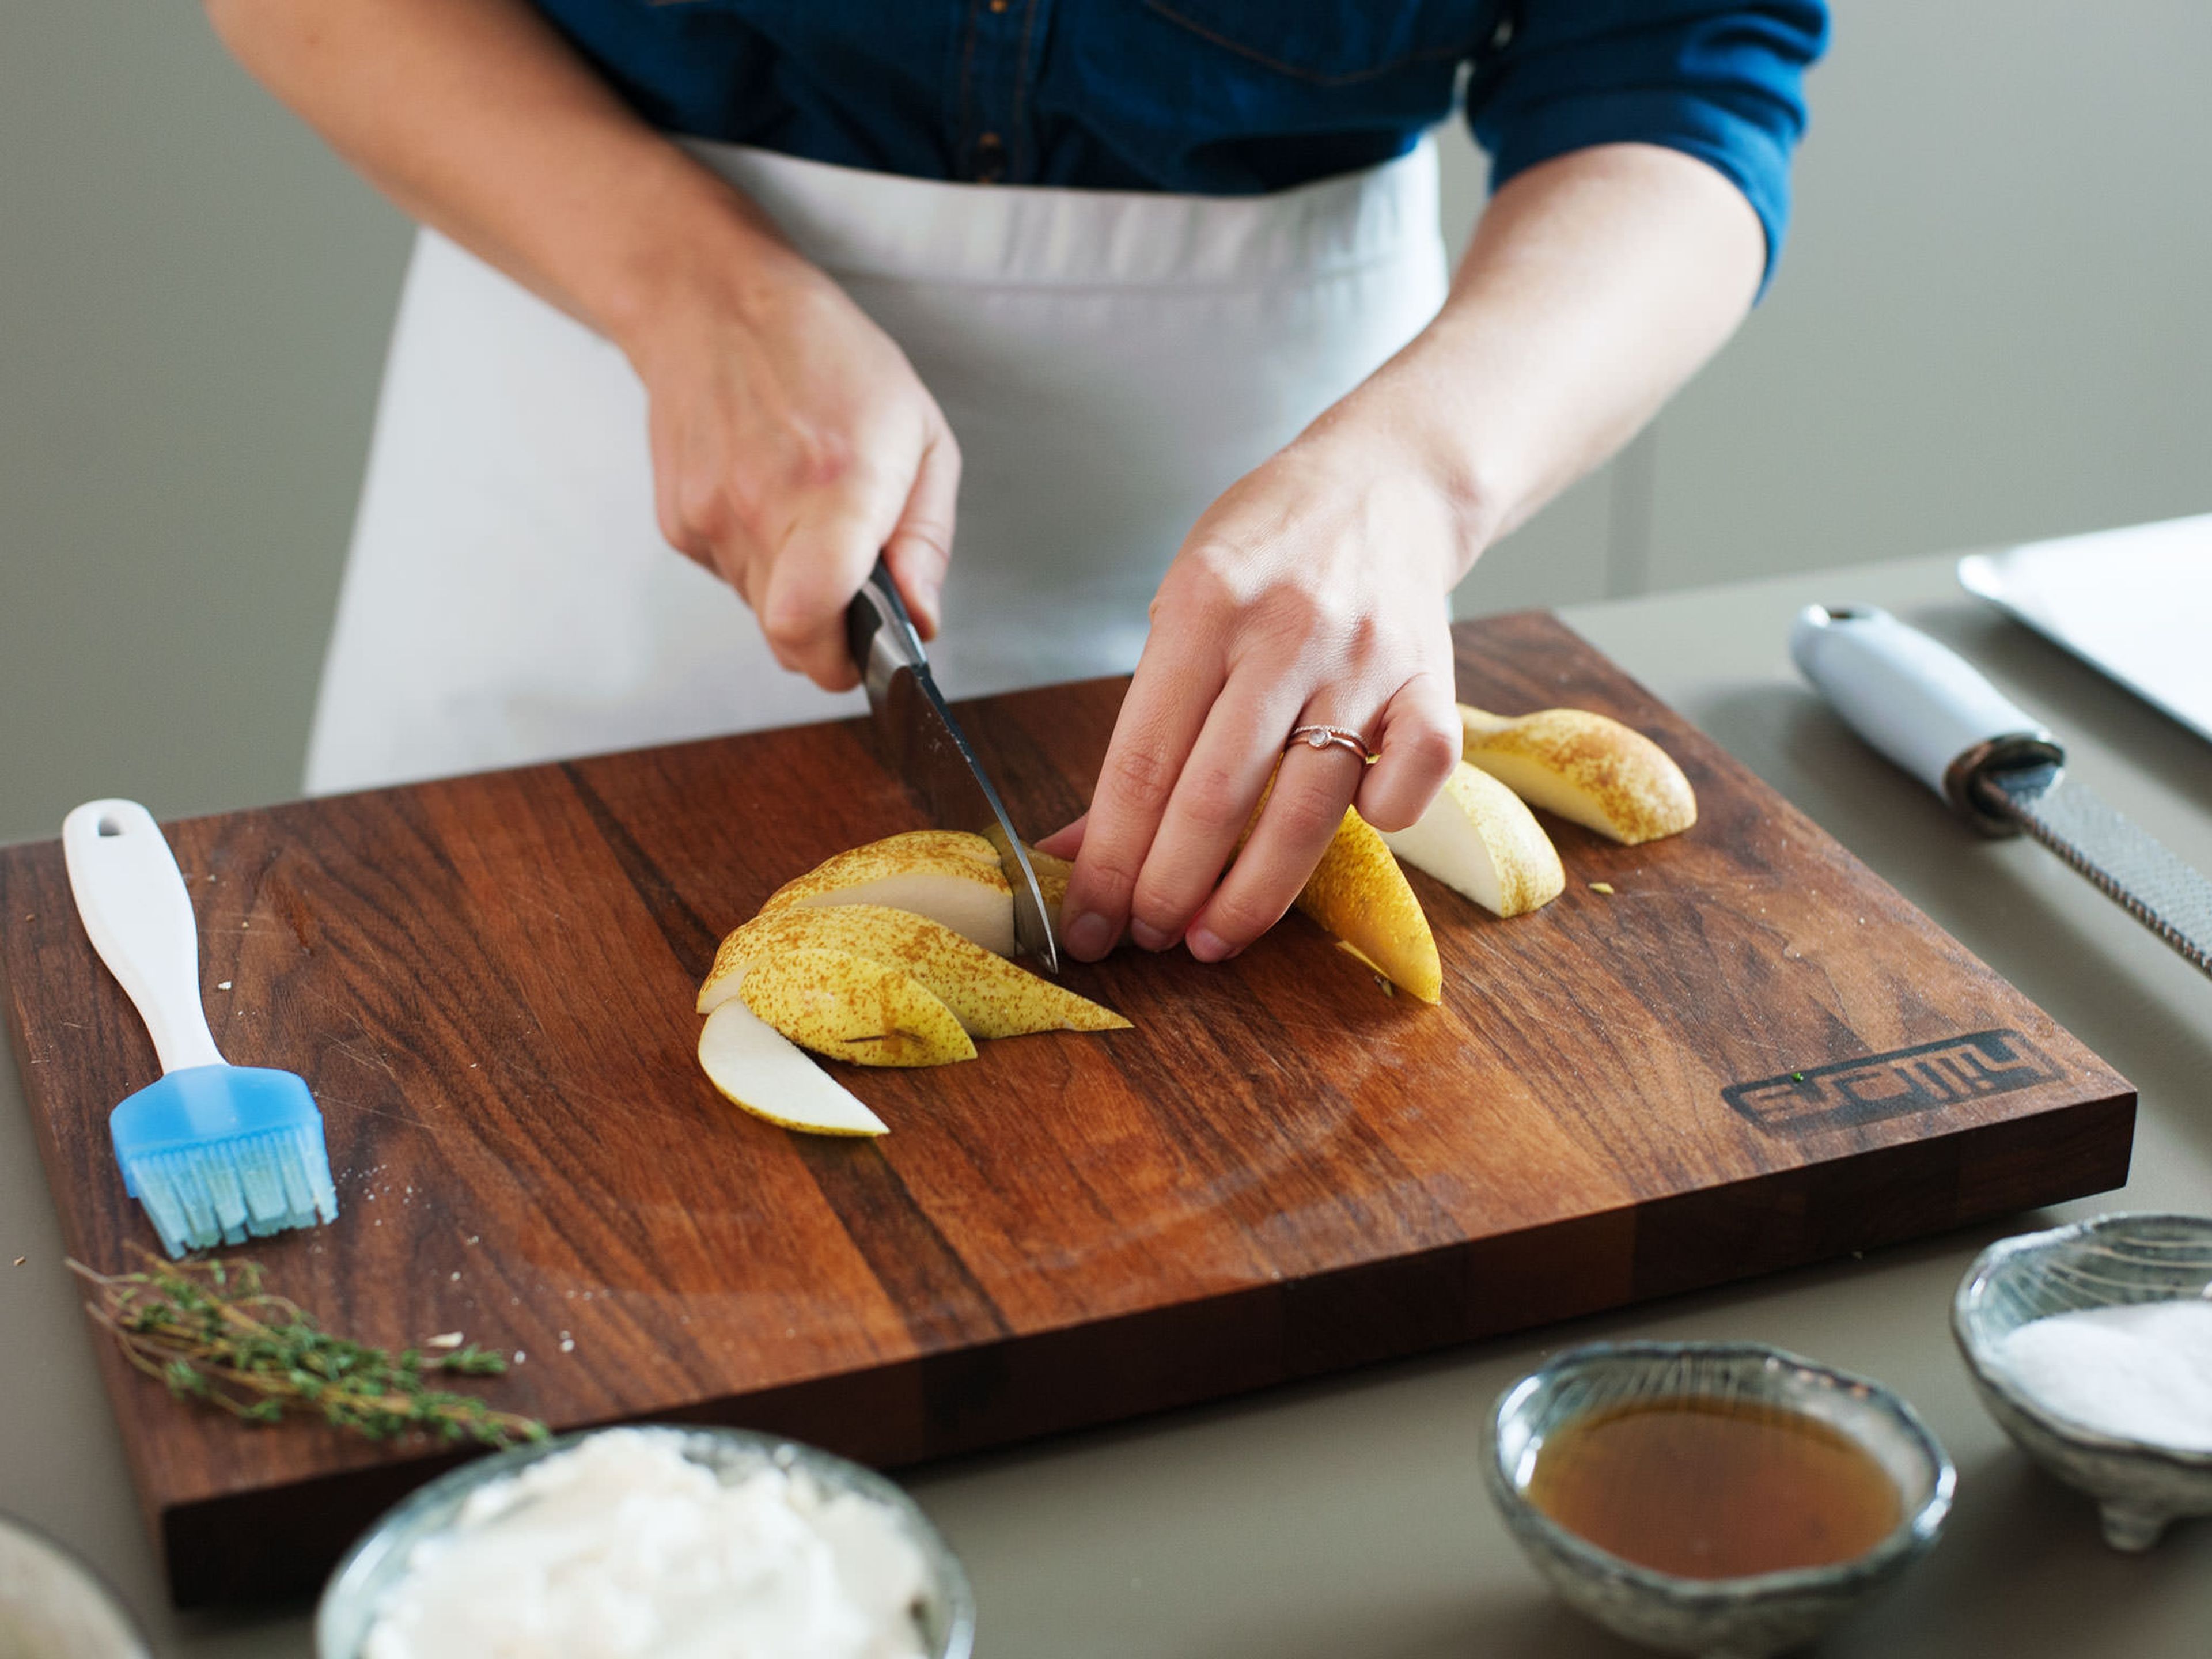 Increase oven temperature to 220°C/425°F. Slice pears and arrange on parchment-lined baking sheet.